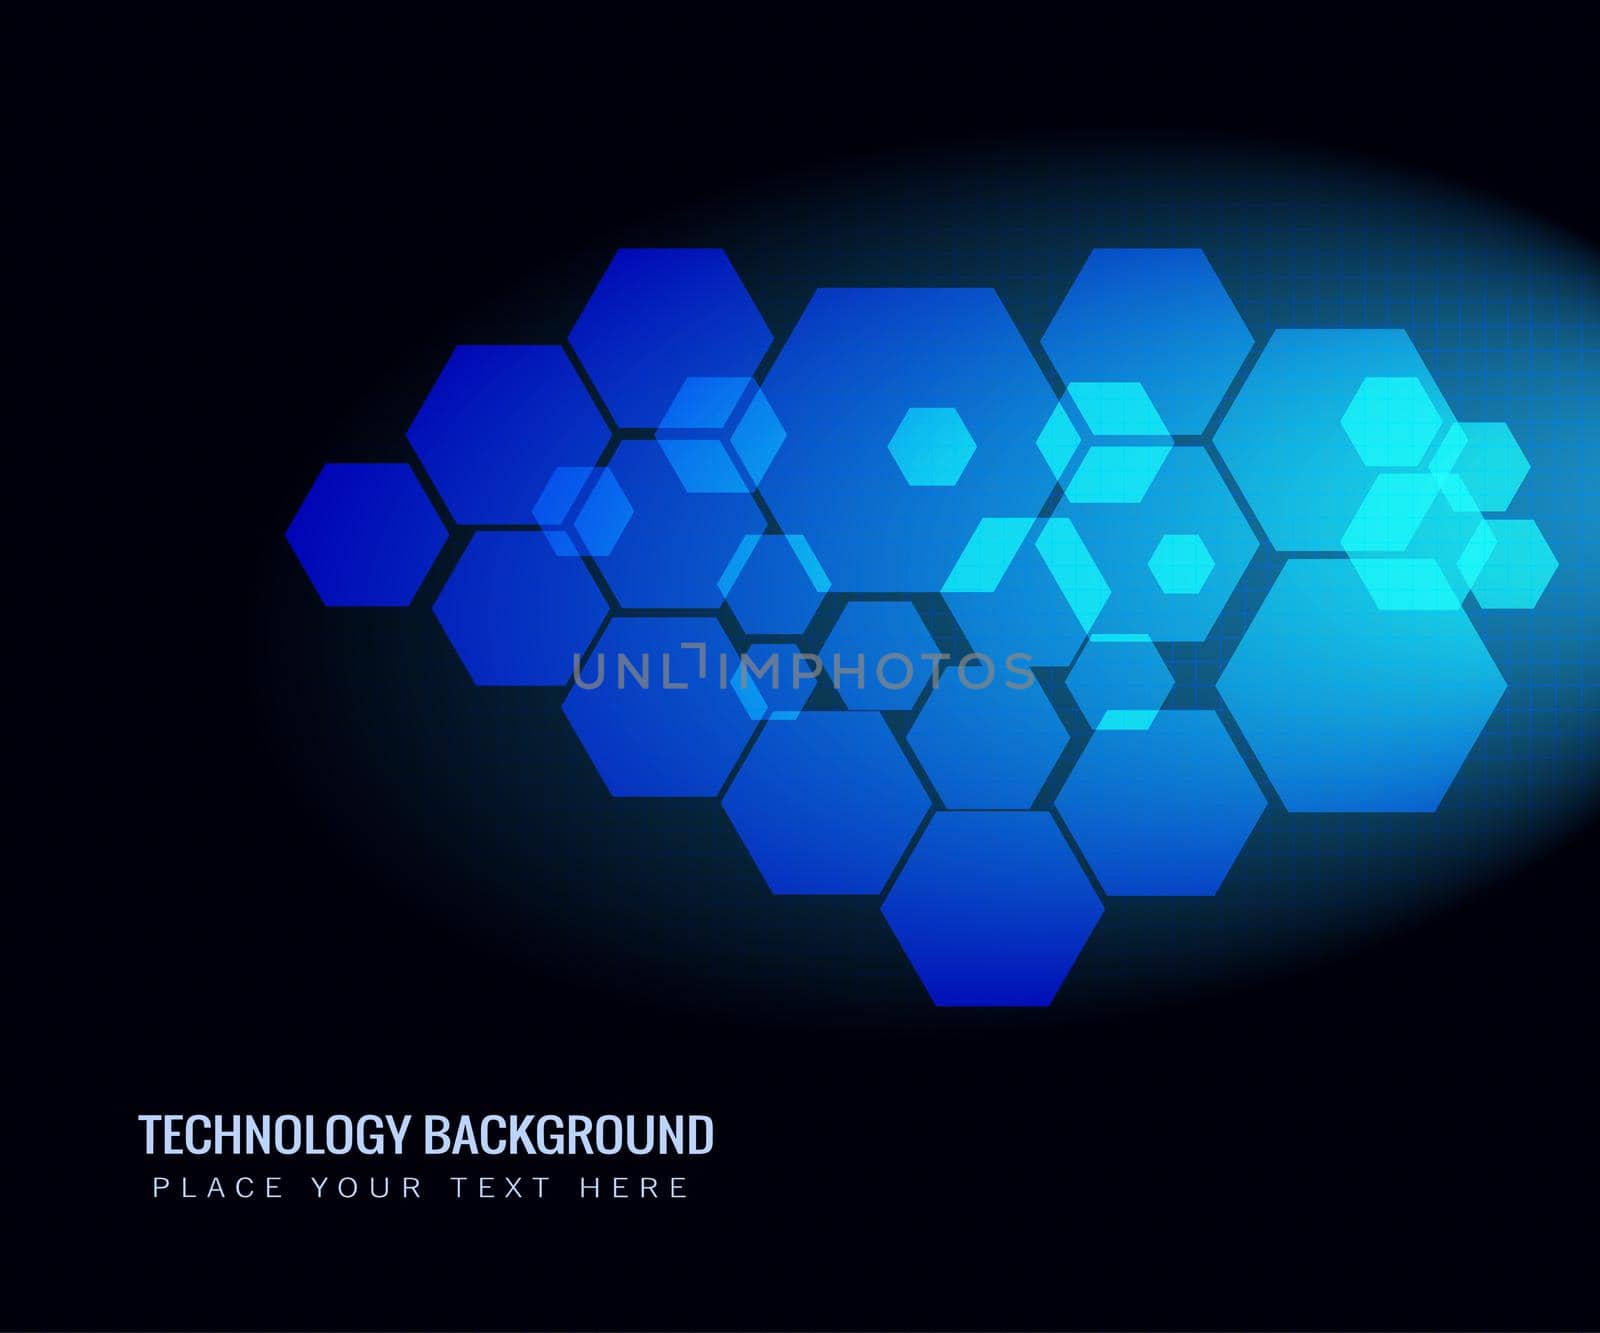 Abstract of futuristic surface with hexagons